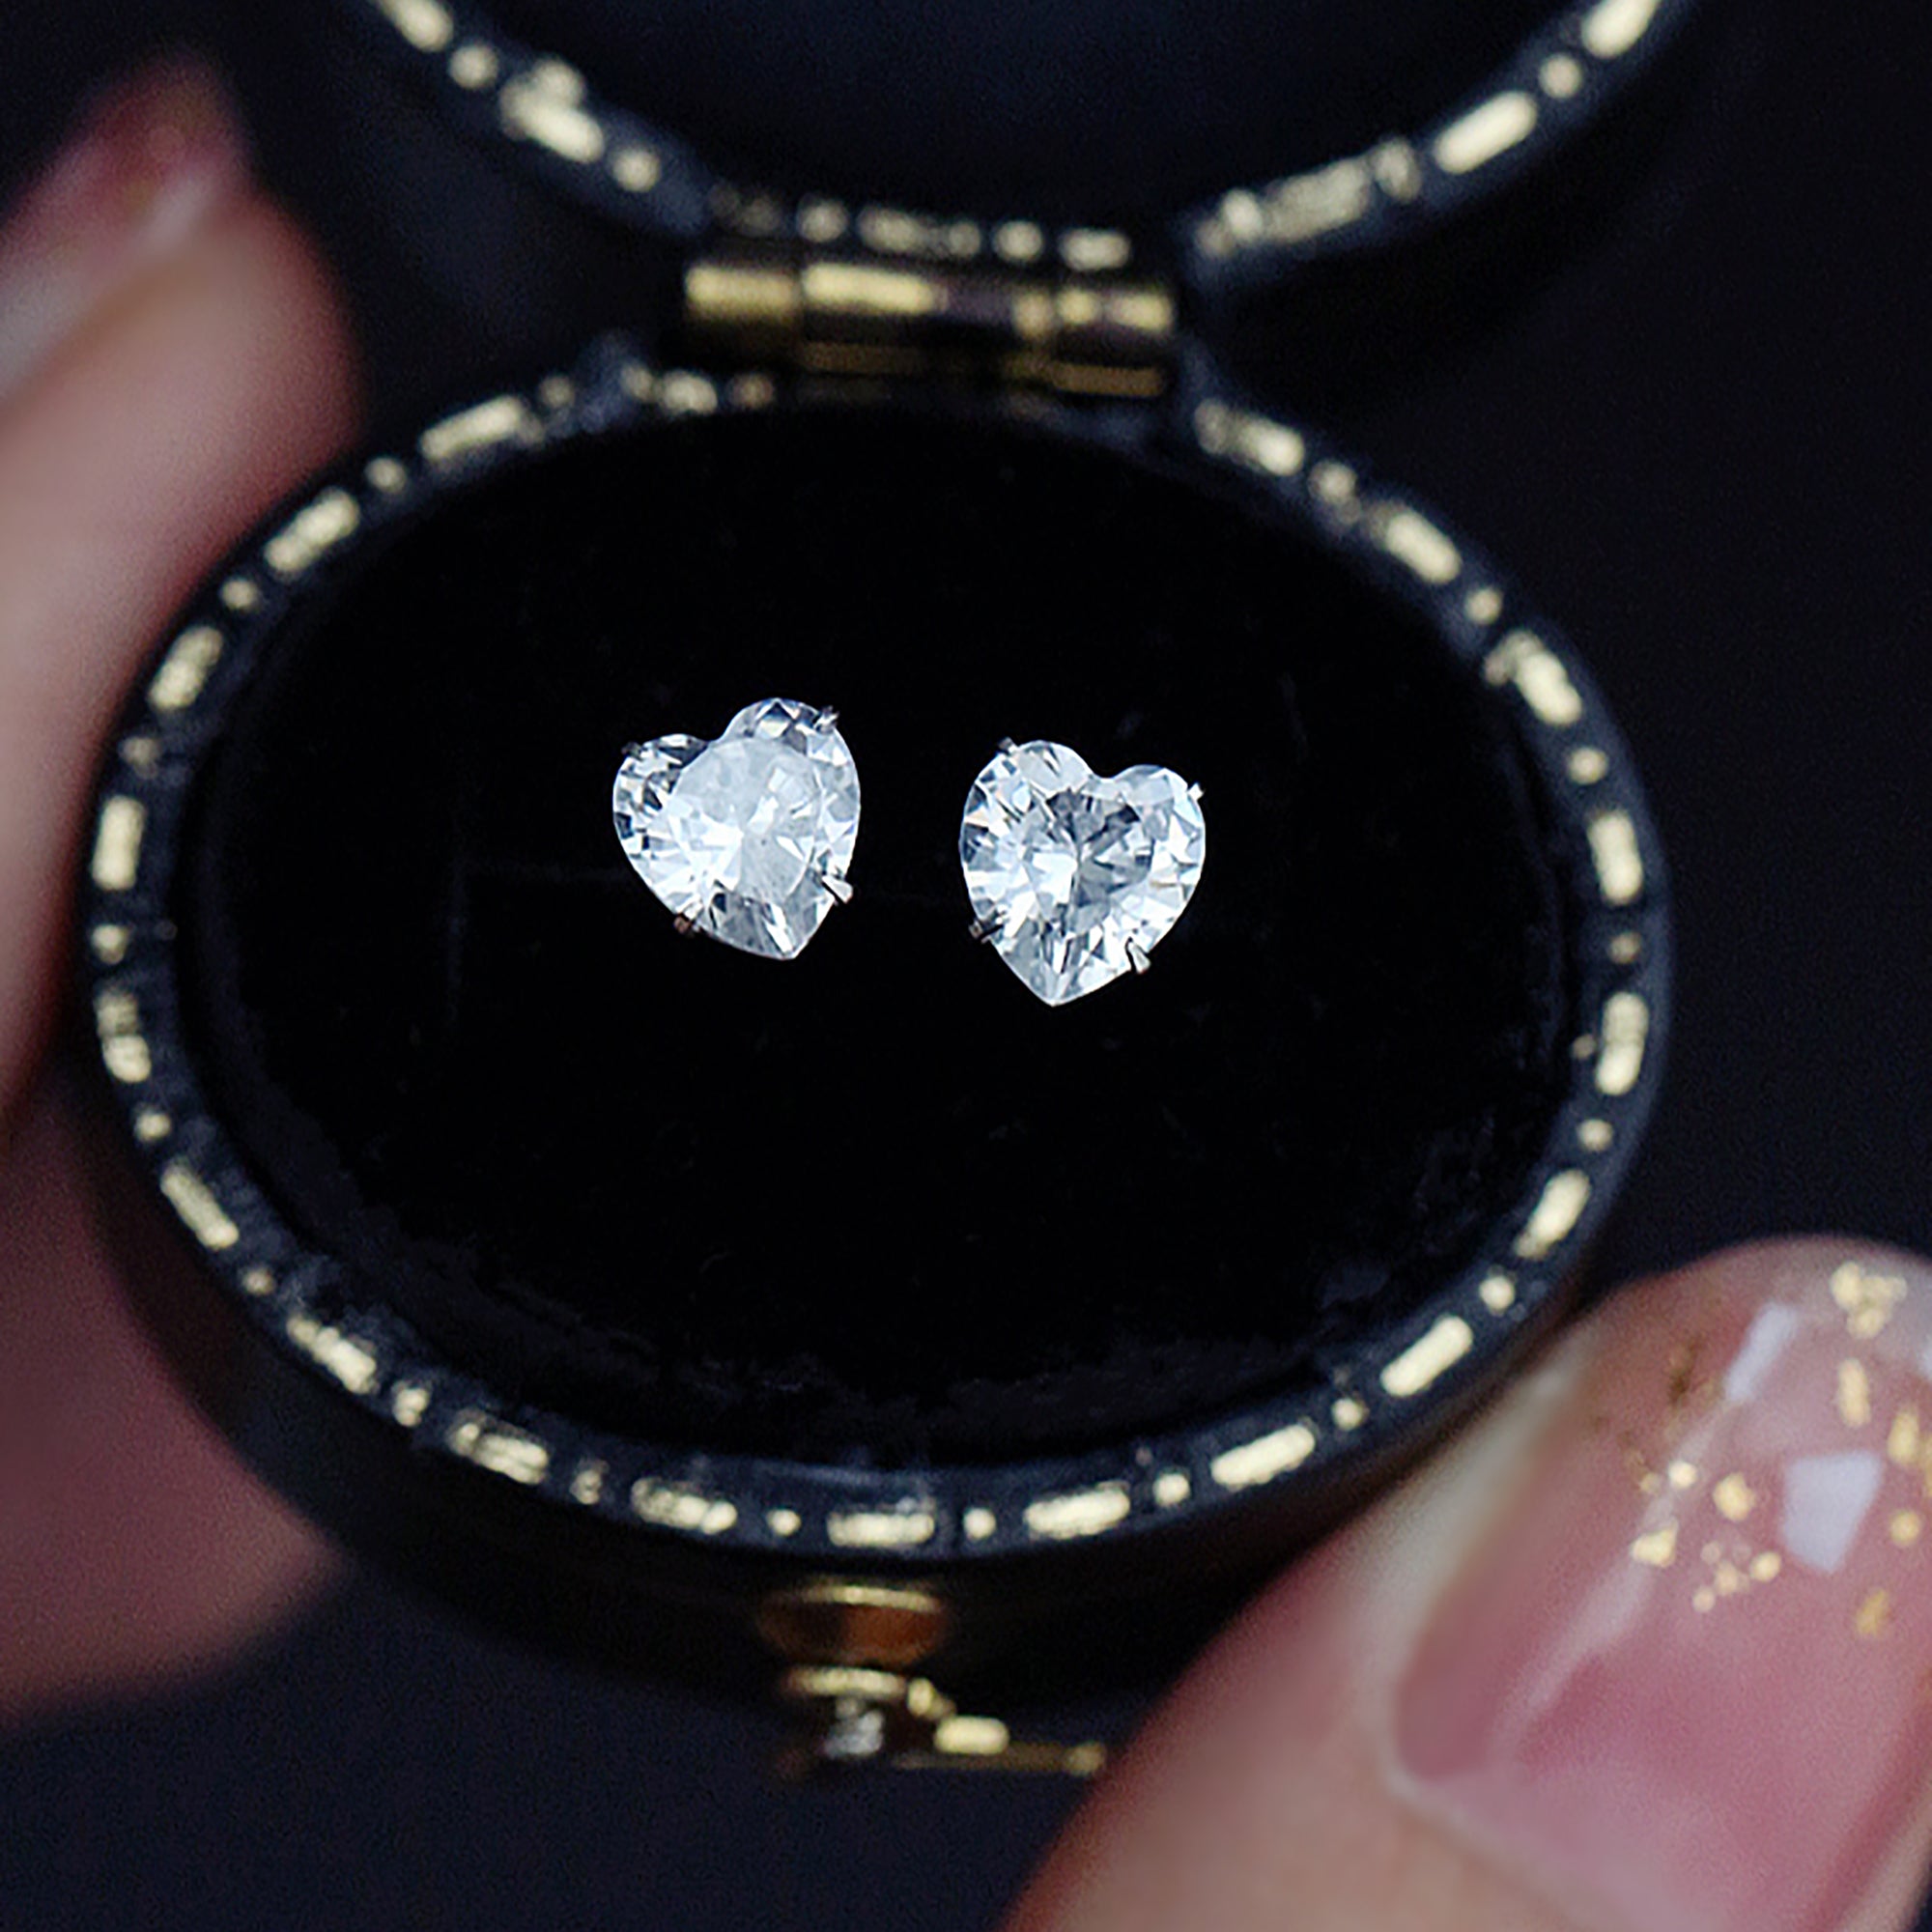 (3 / 4 / 5 mm) 925 Sterling Silver CZ Heart Stud Earrings Gift Party wedding influencer styling KOL / Youtuber / Celebrity / Fashion Icon